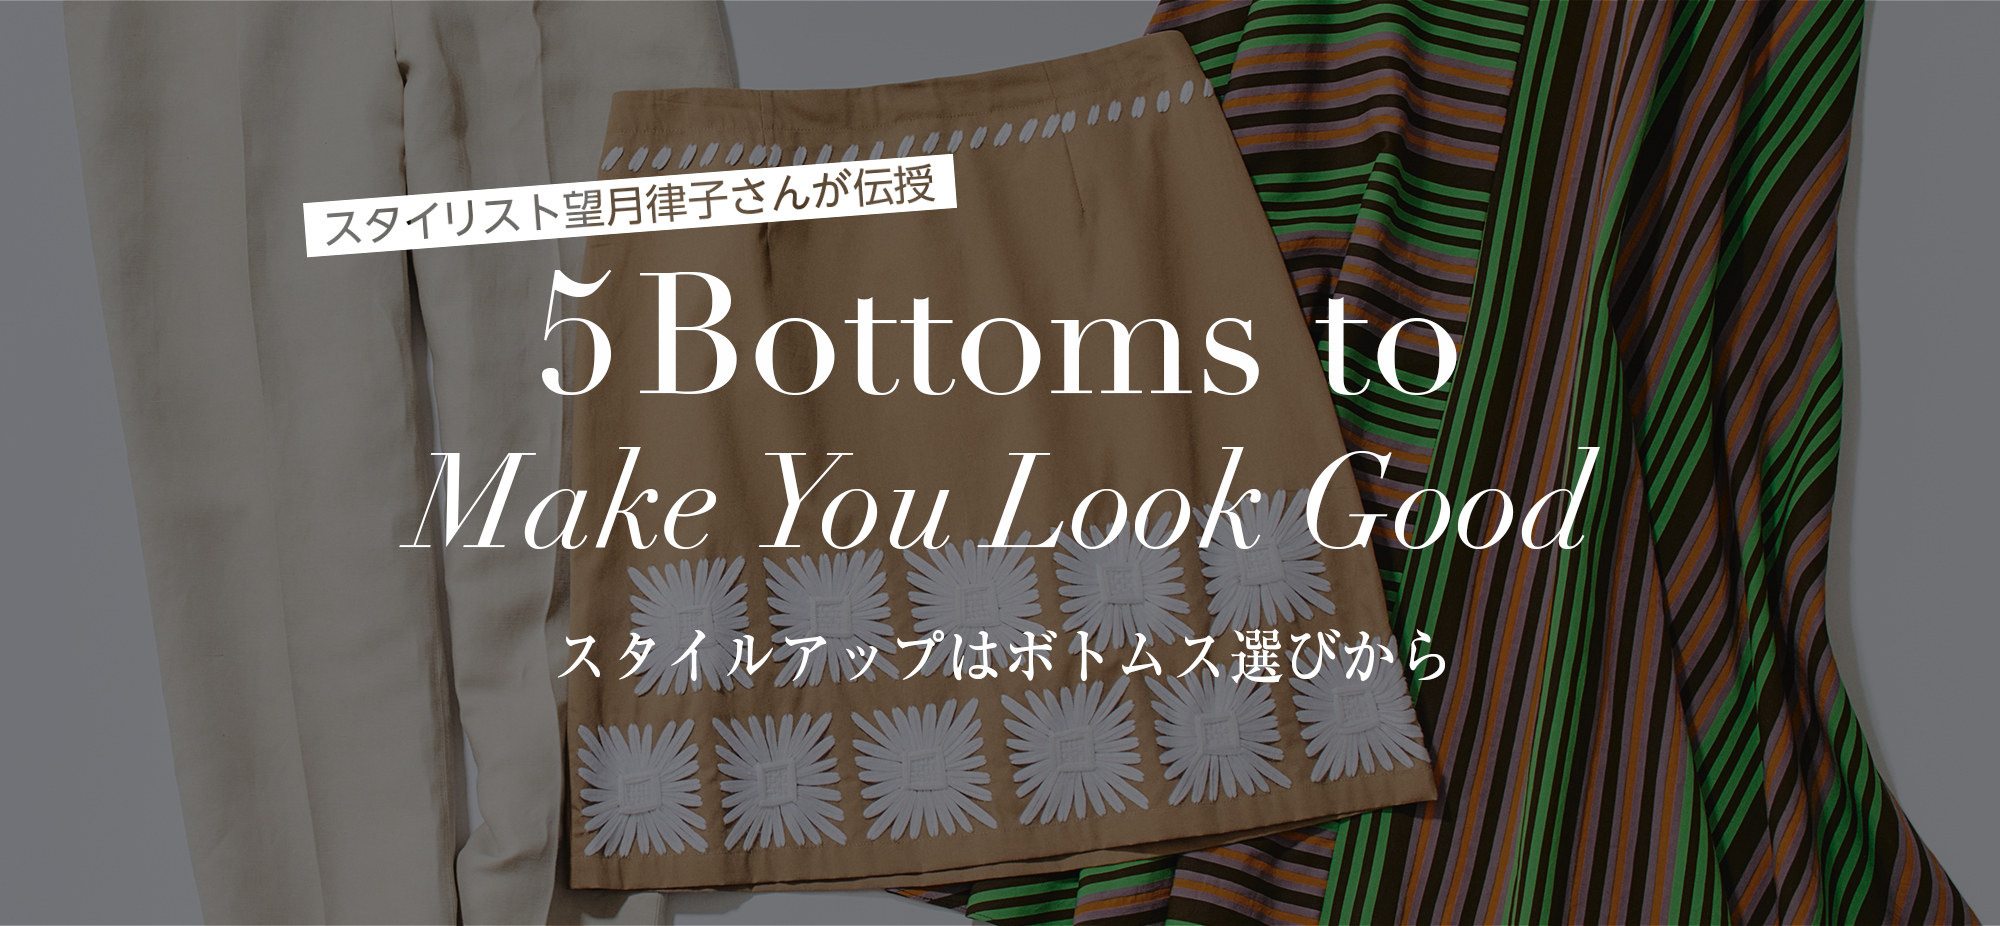 5 Bottoms to Make you Look Good